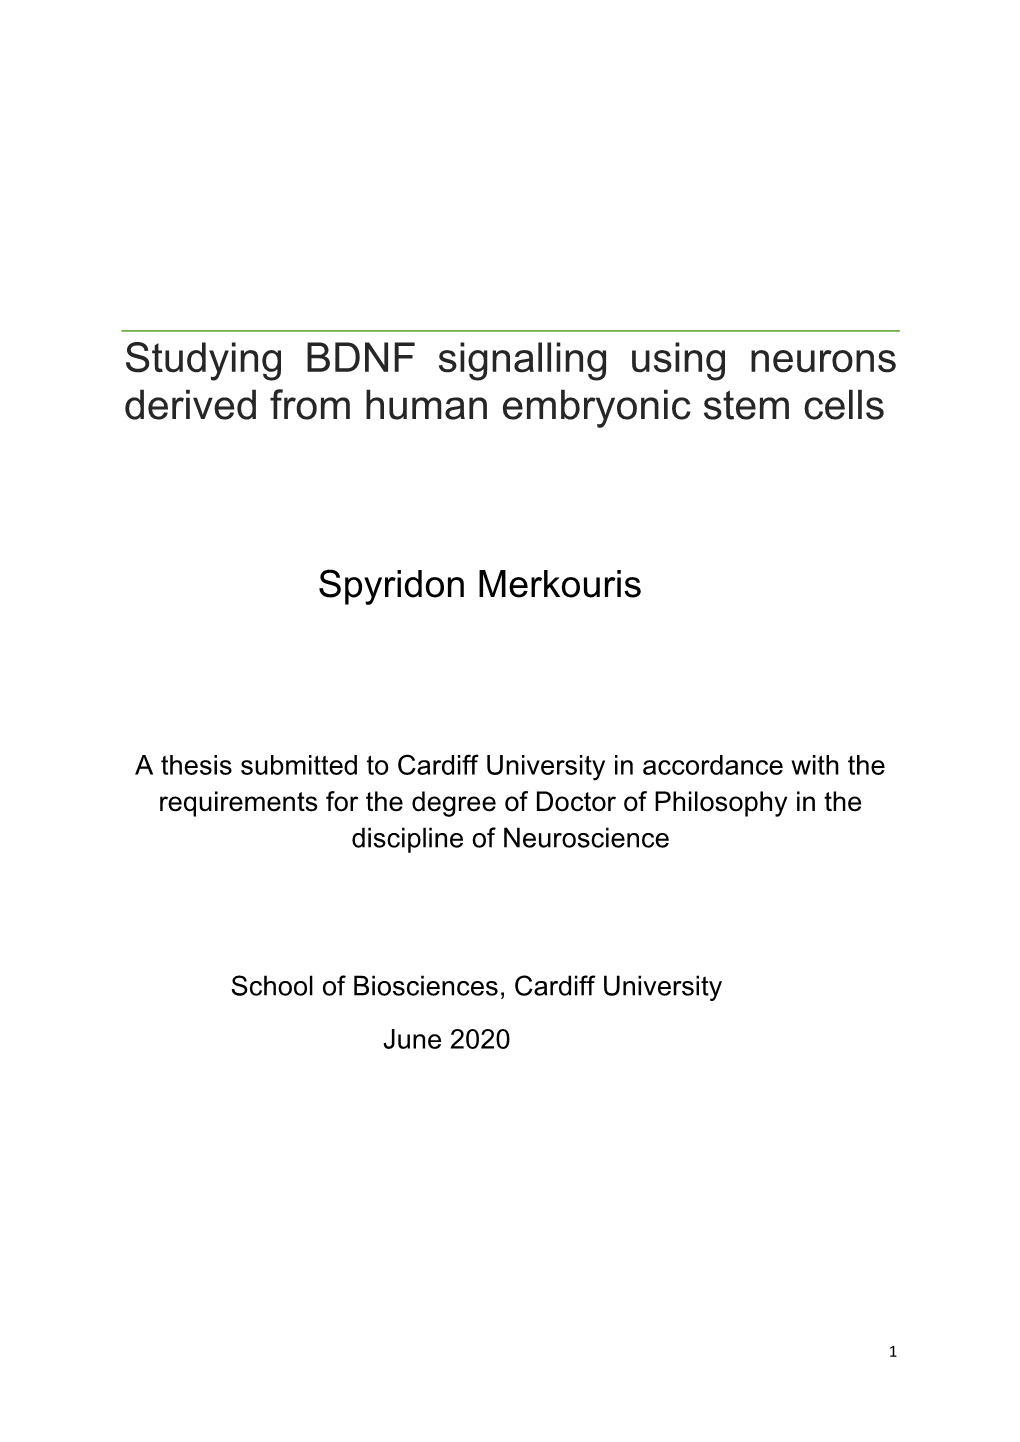 Studying BDNF Signalling Using Neurons Derived from Human Embryonic Stem Cells